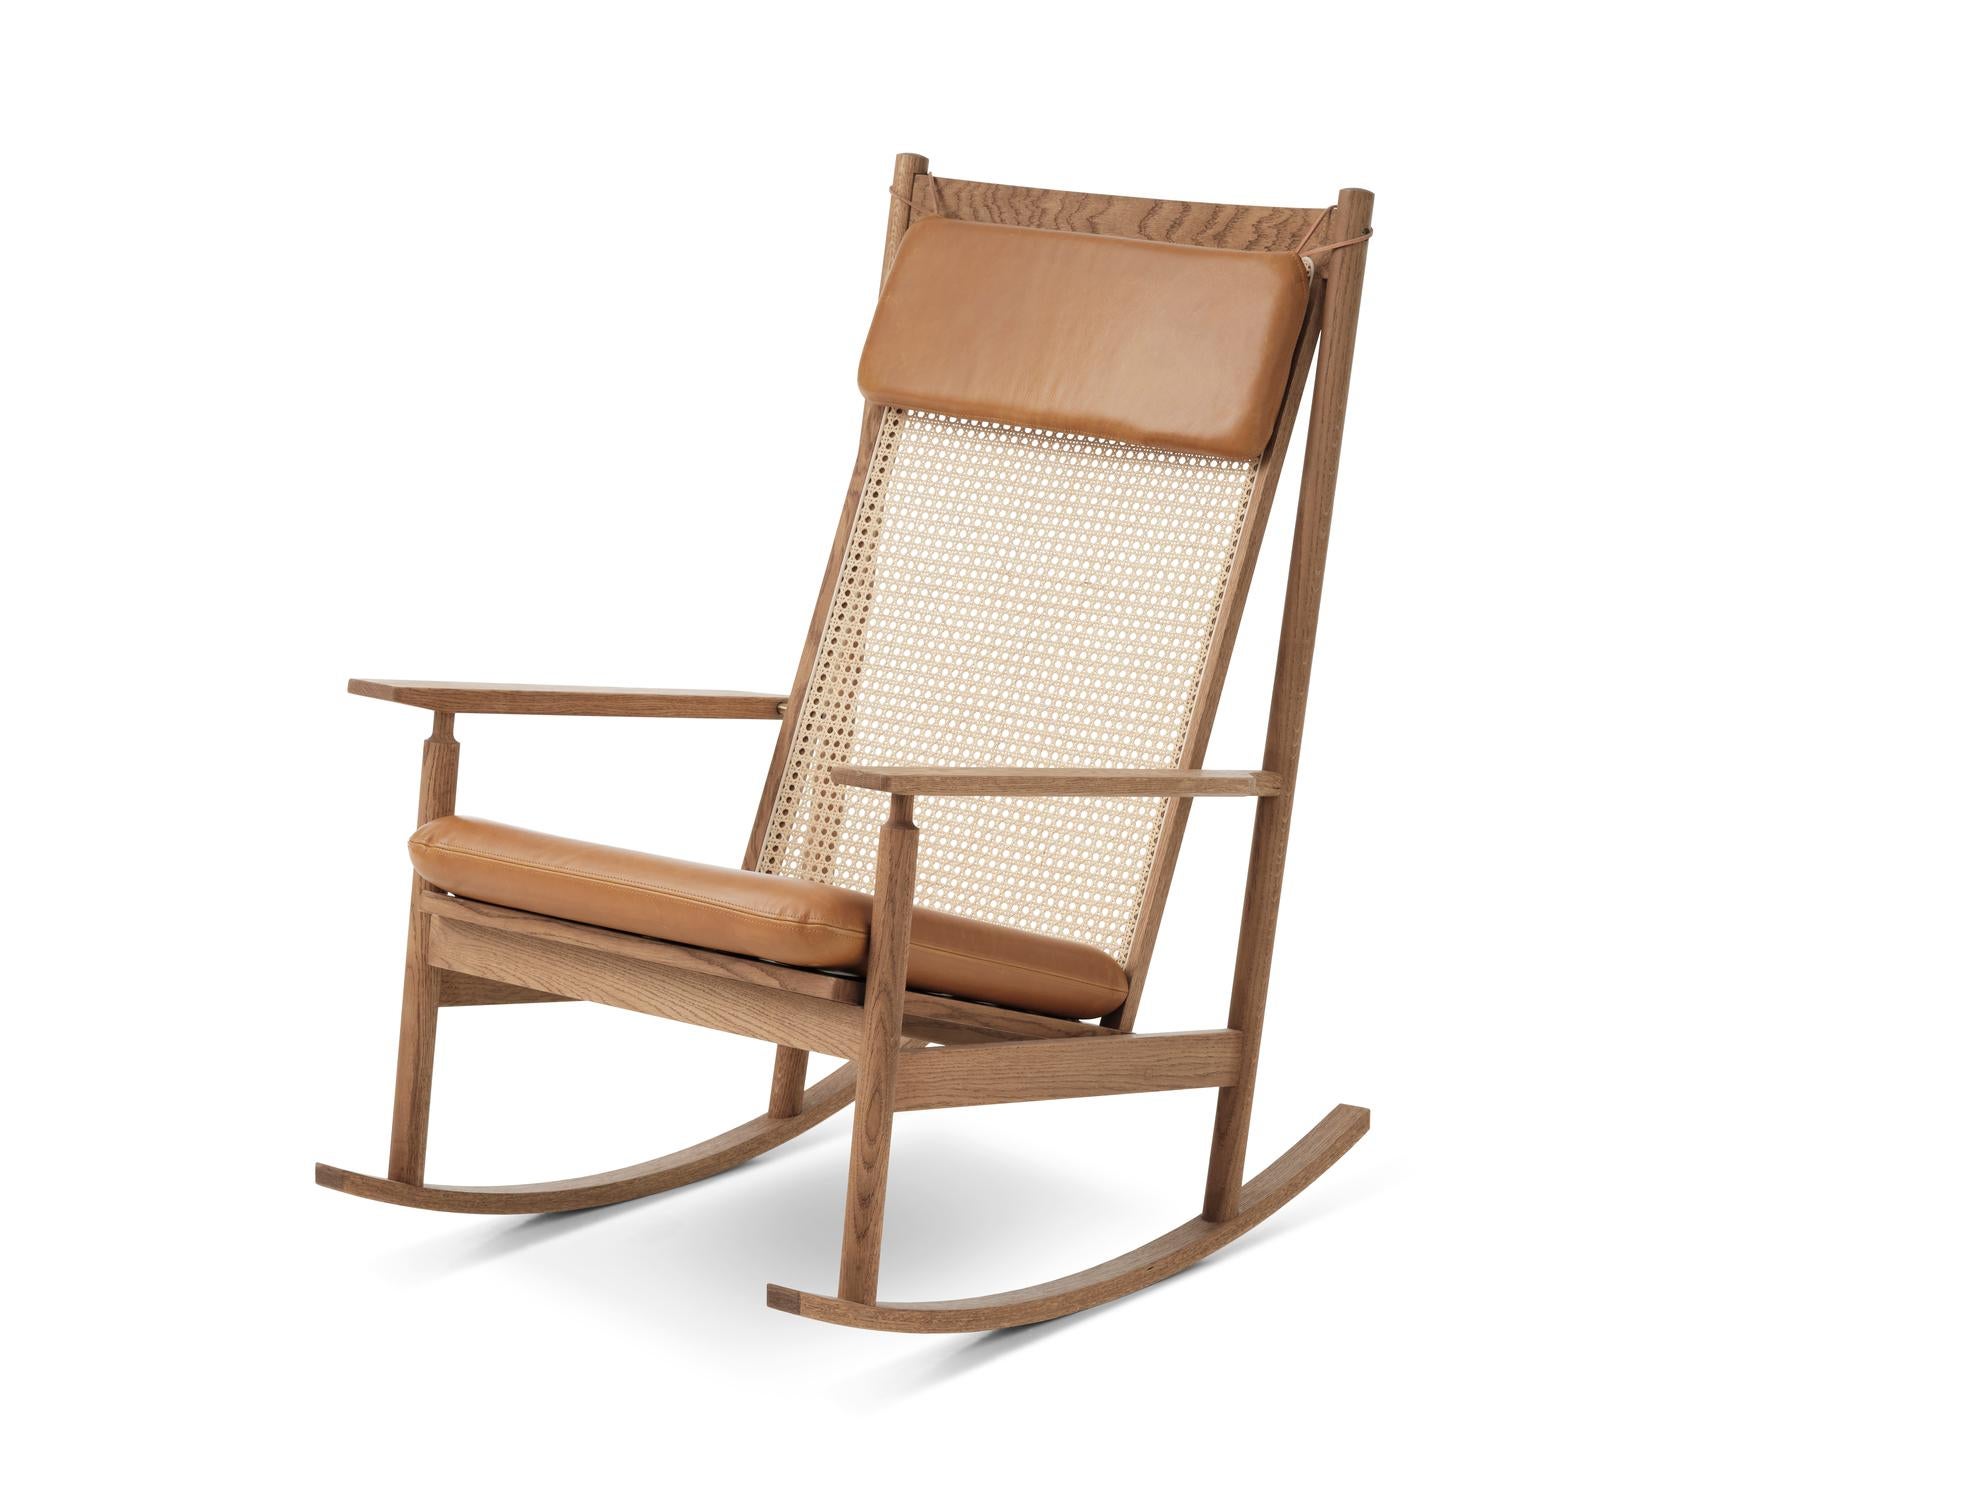 Swing Rocking chair Silk Teak Camel by Warm Nordic
Dimensions: D91 x W68 x H 103 cm
Material: Wood, Foam, Rubber springs, French cane, Textile or leather upholstery, Teak
Weight: 16.5 kg
Also available in different colors, materials and